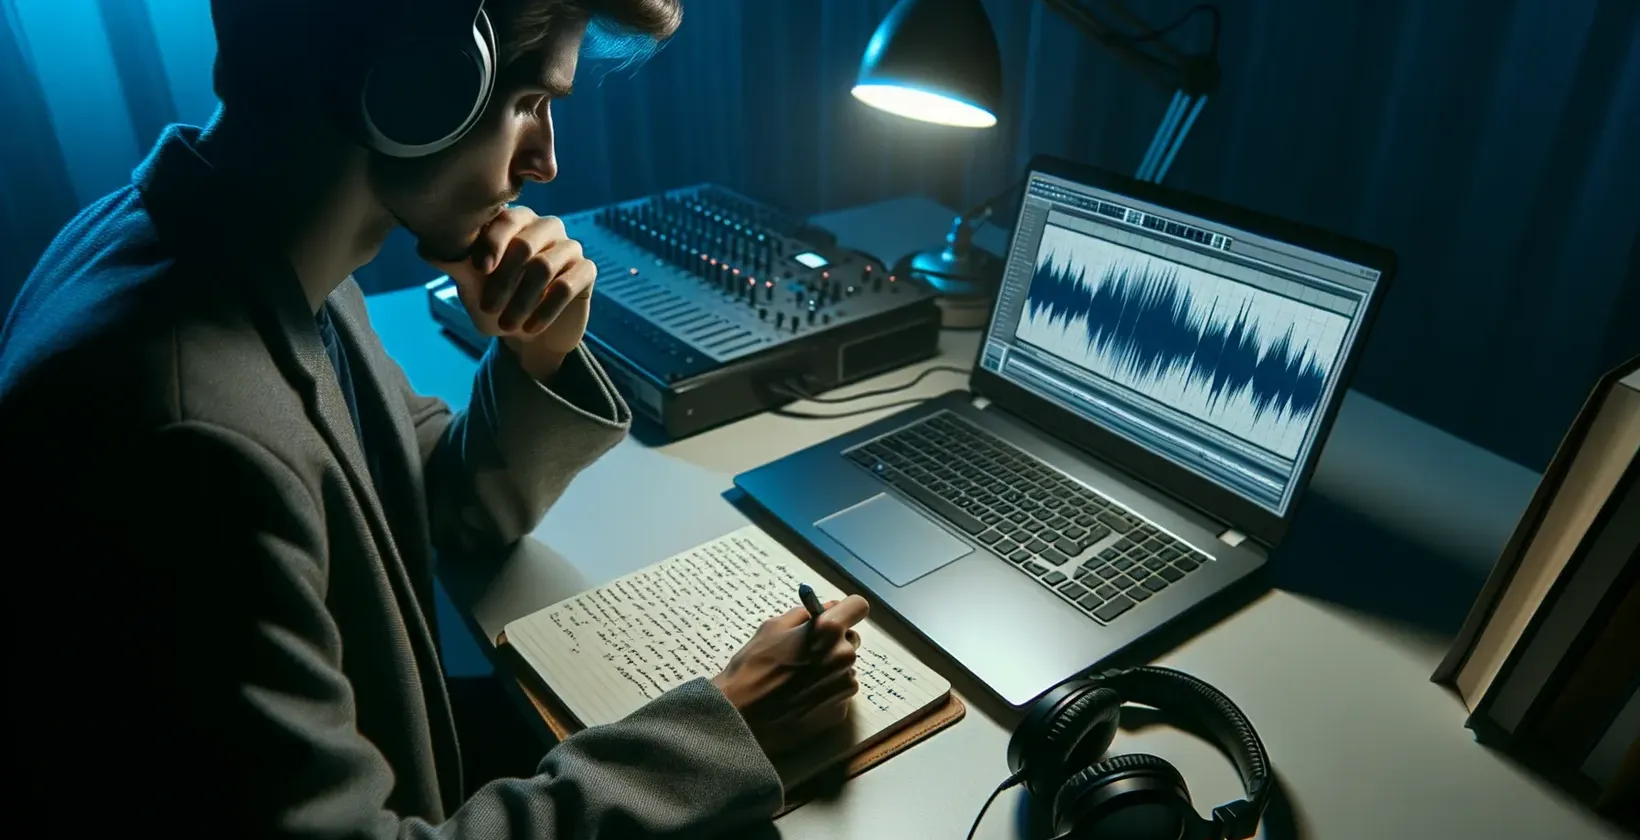 Audio recordings to study illustrated by a man with headphones analyzing waveform on a laptop.